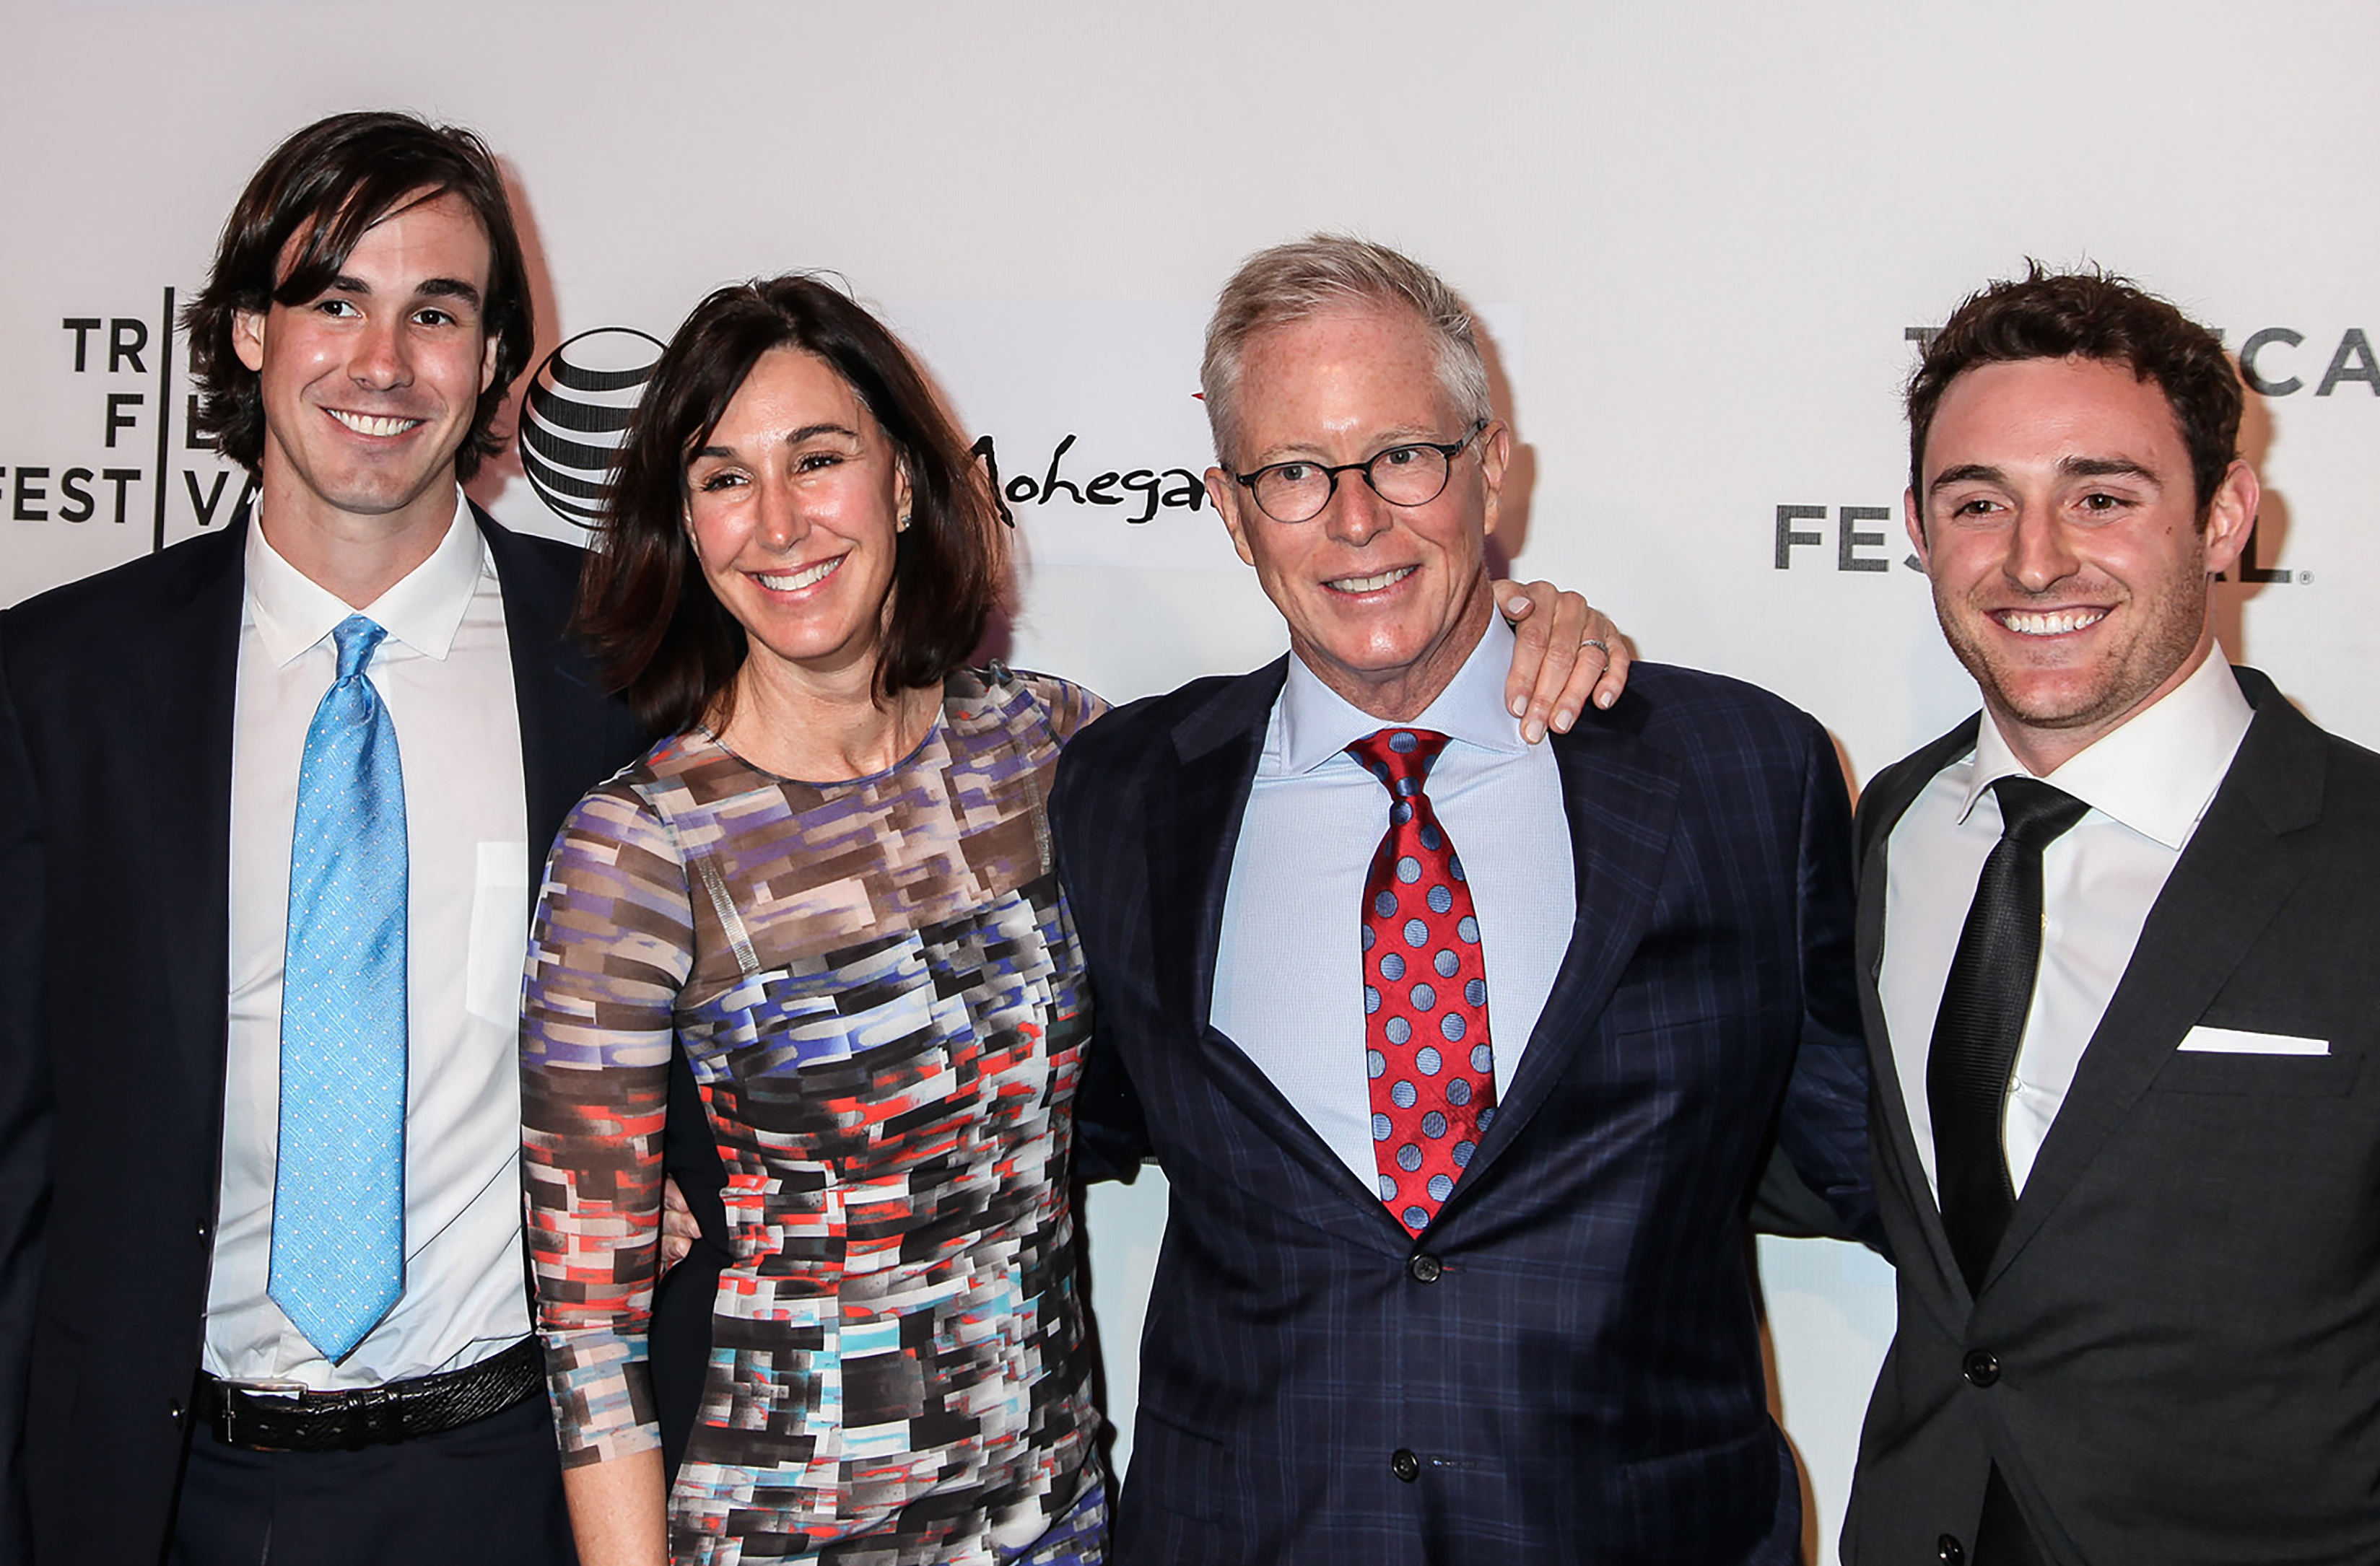 Graham Clark and Family at the Play It Forward Premiere Tribeca Film Festival, 2015